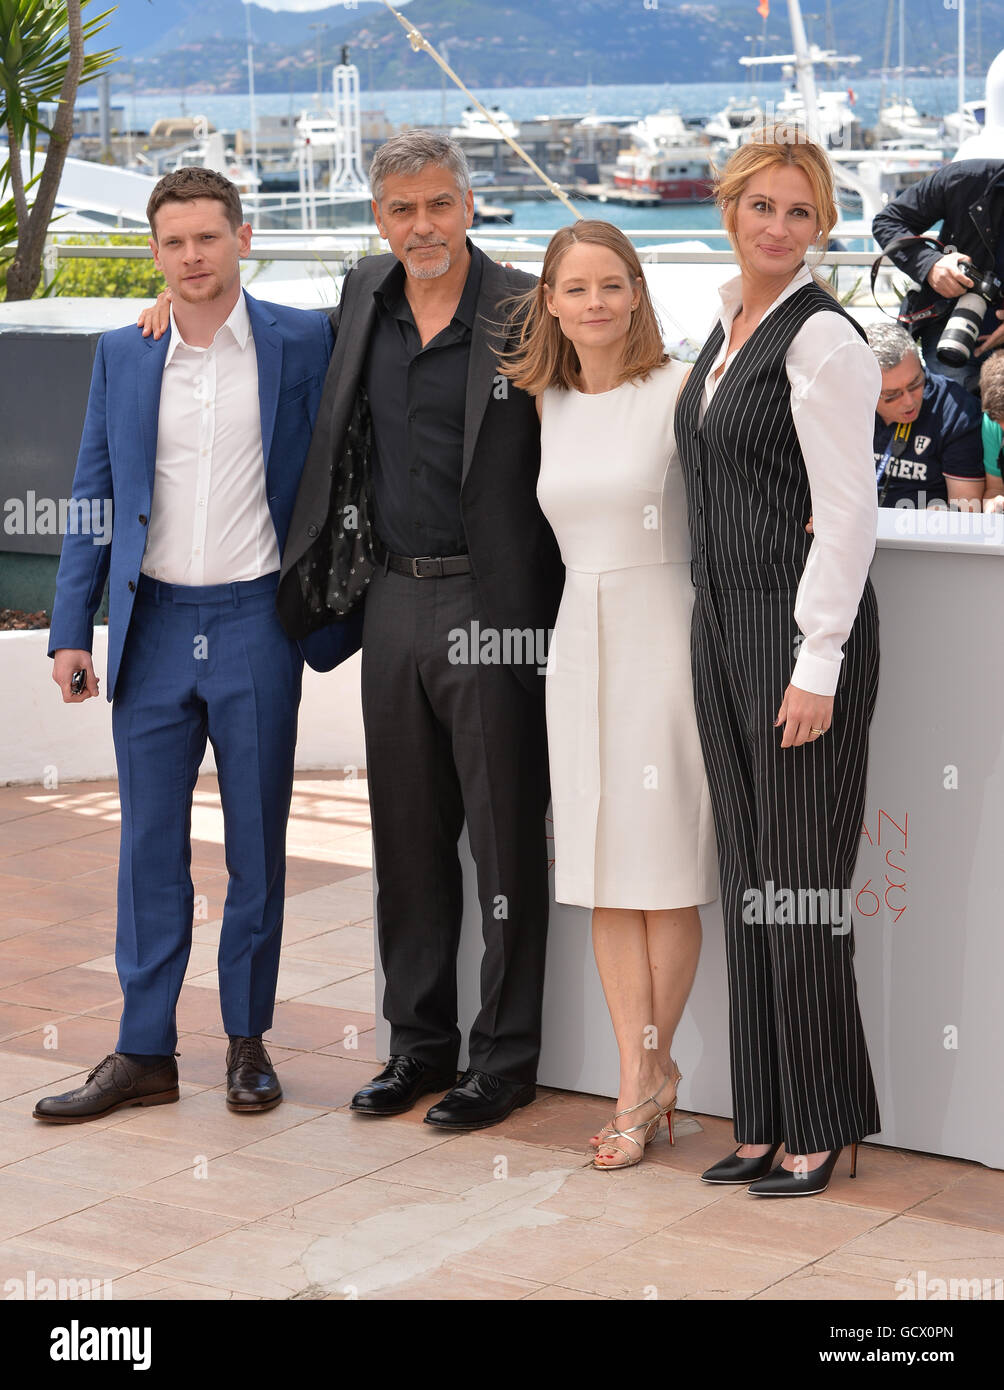 CANNES, FR - MAY 12, 2016: Actress/director Jodie Foster & actors Jack O'Connell, George Clooney & Julia Roberts at the photocall for 'Money Monster' at the 69th Festival de Cannes. Stock Photo